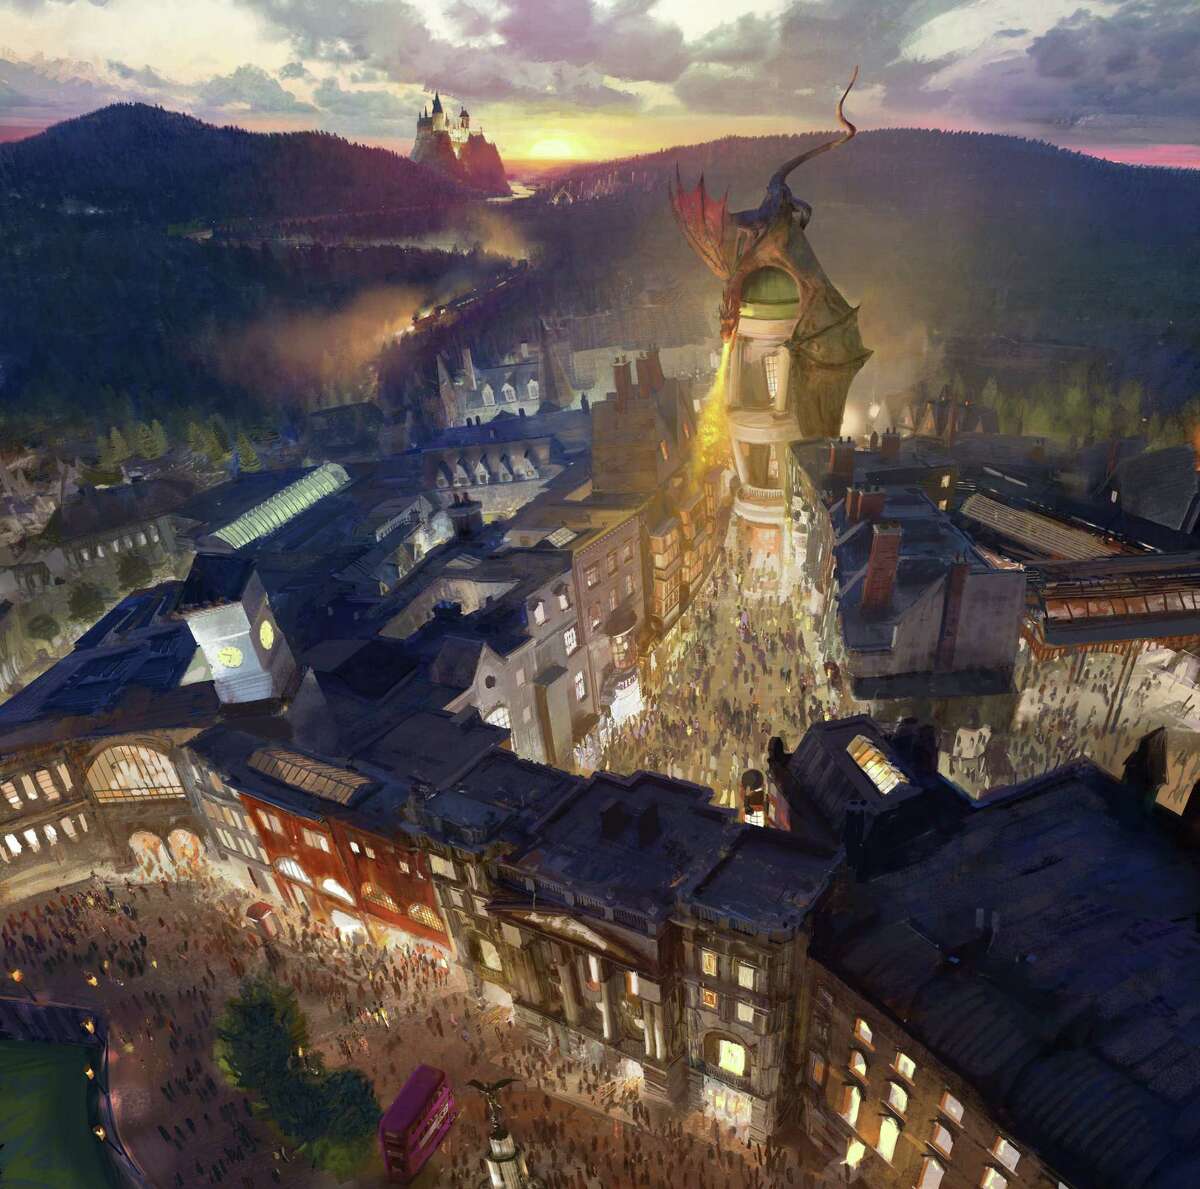 An artist rendering shows the Harry Potter- themed area of the Universal theme park in Orlando, Fla., planned for a summer 2014 opening, which was inspired partly by the fictional Diagon Alley from the Harry Potter books and movies. The area will be linked to the existing Wizarding World of Harry Potter attraction by a train called the Hogwarts Express.